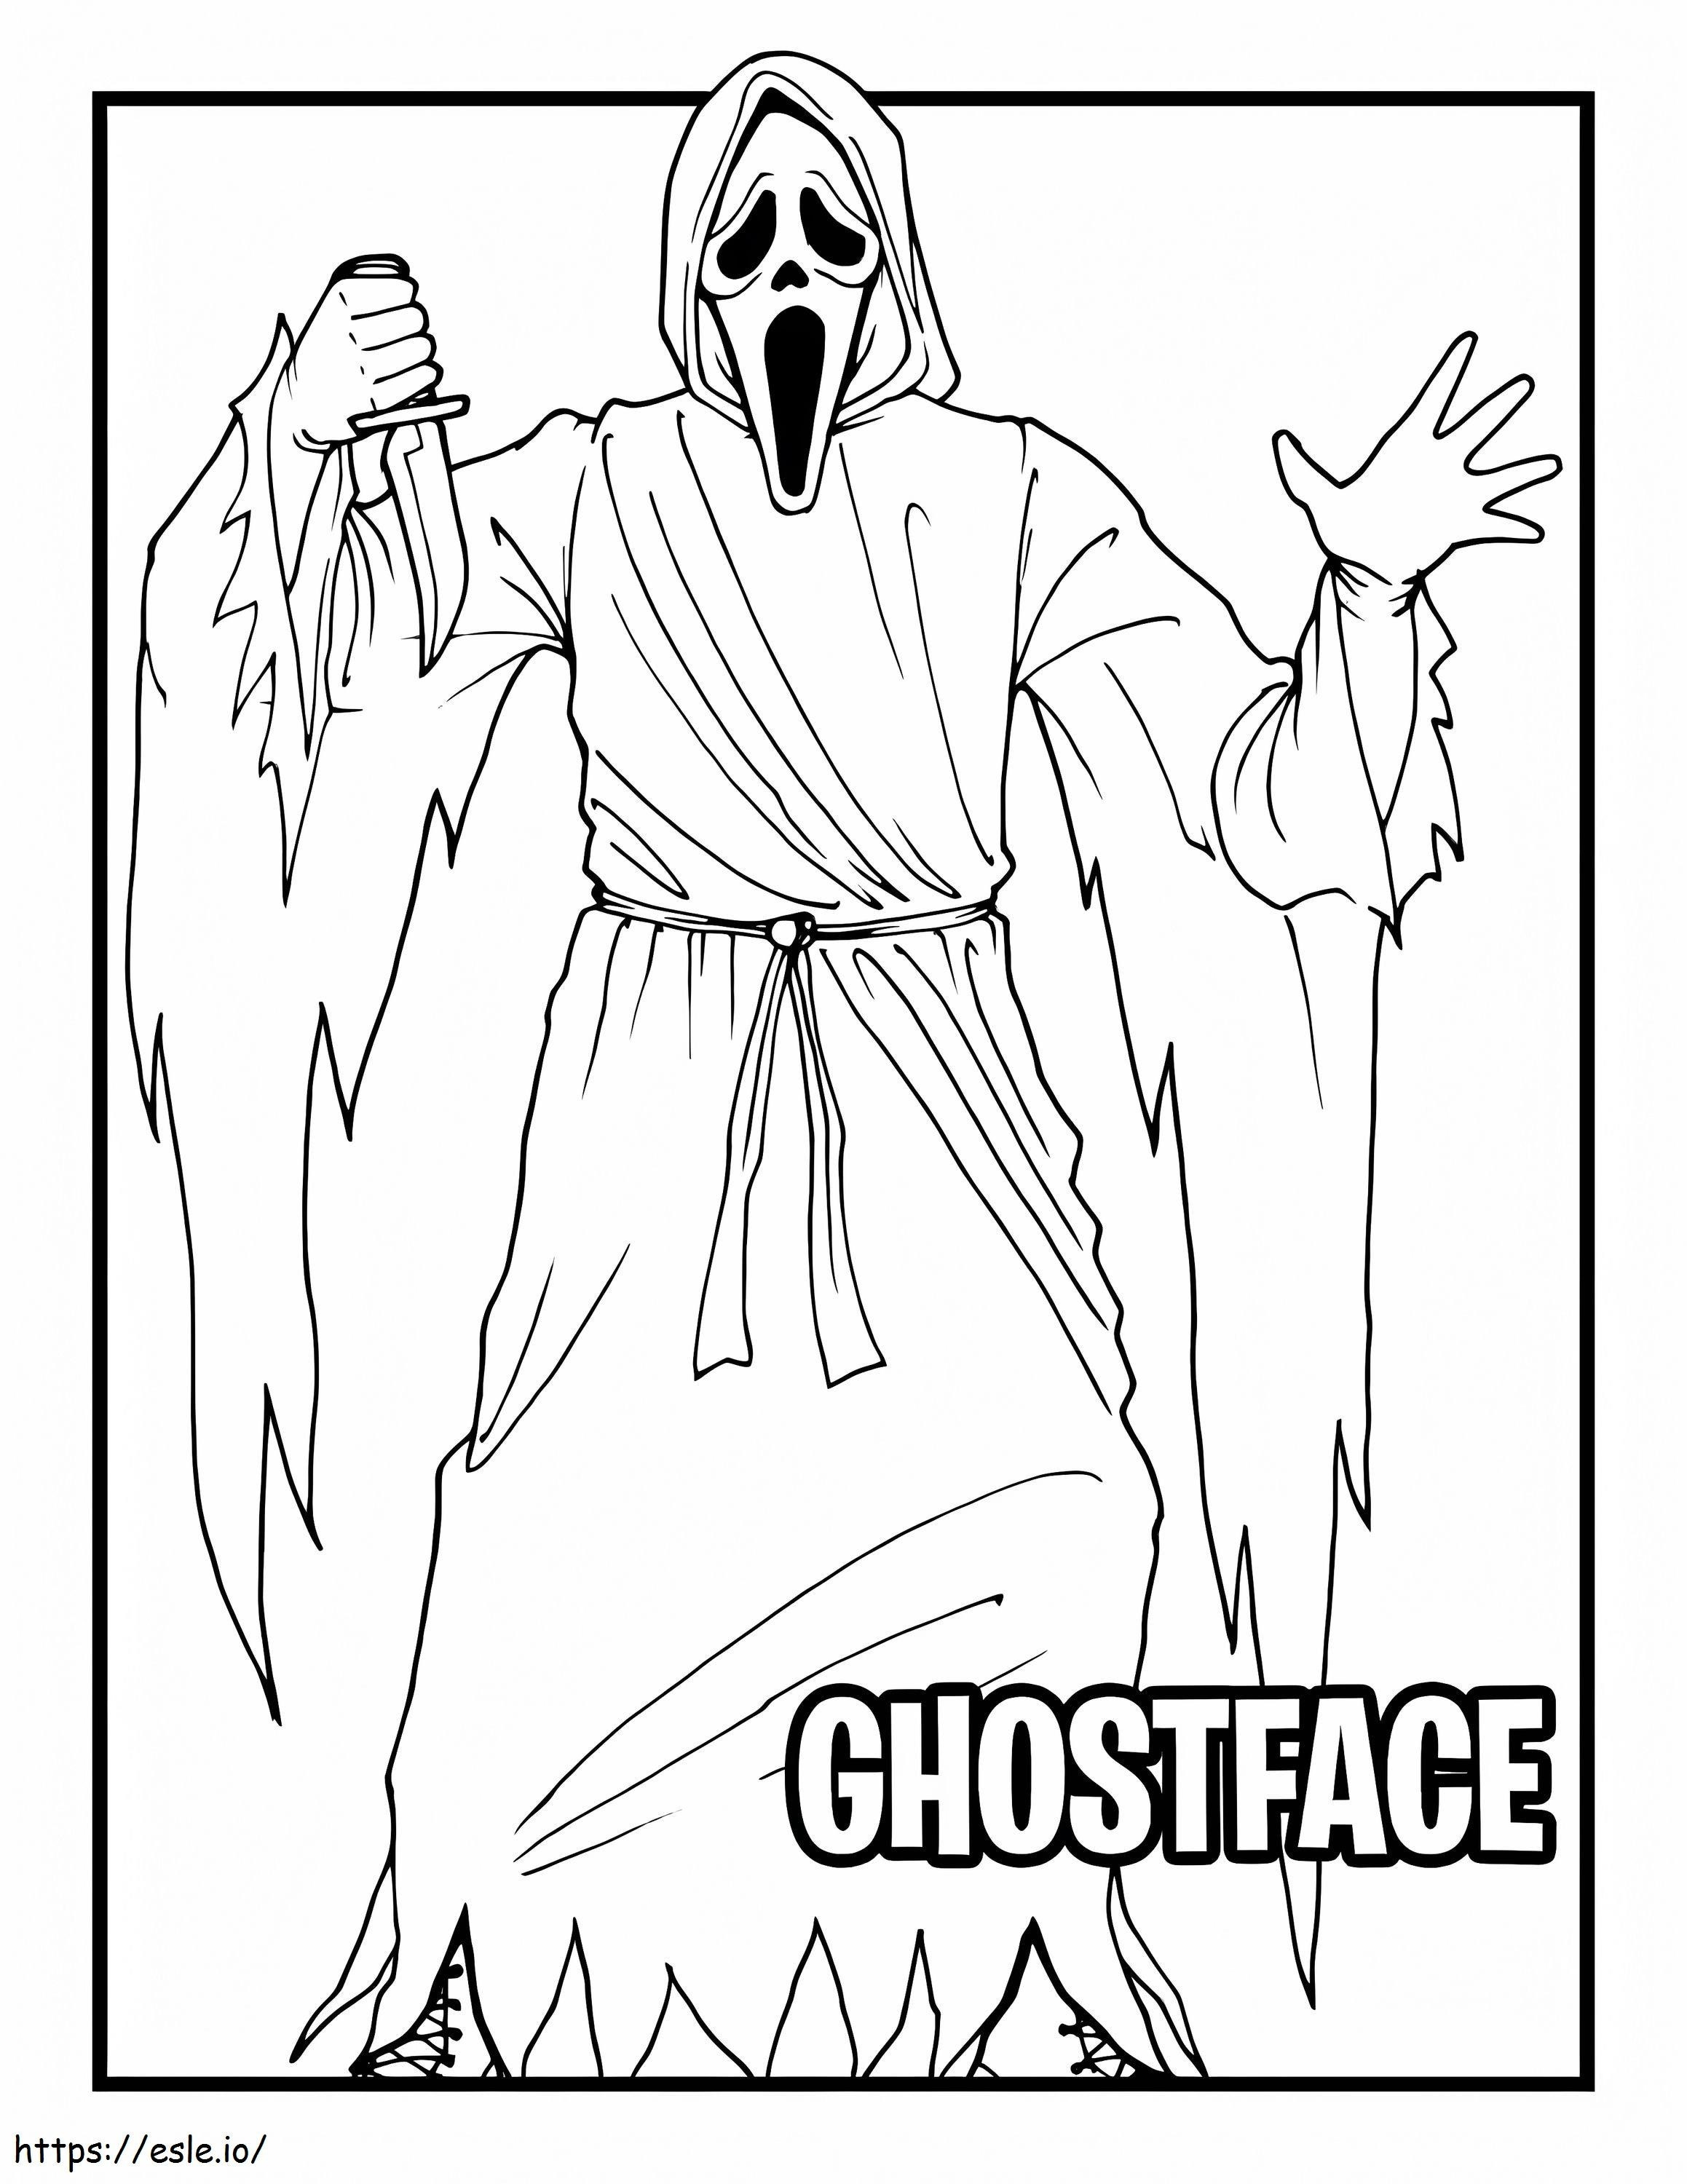 Plain Ghost Face coloring page